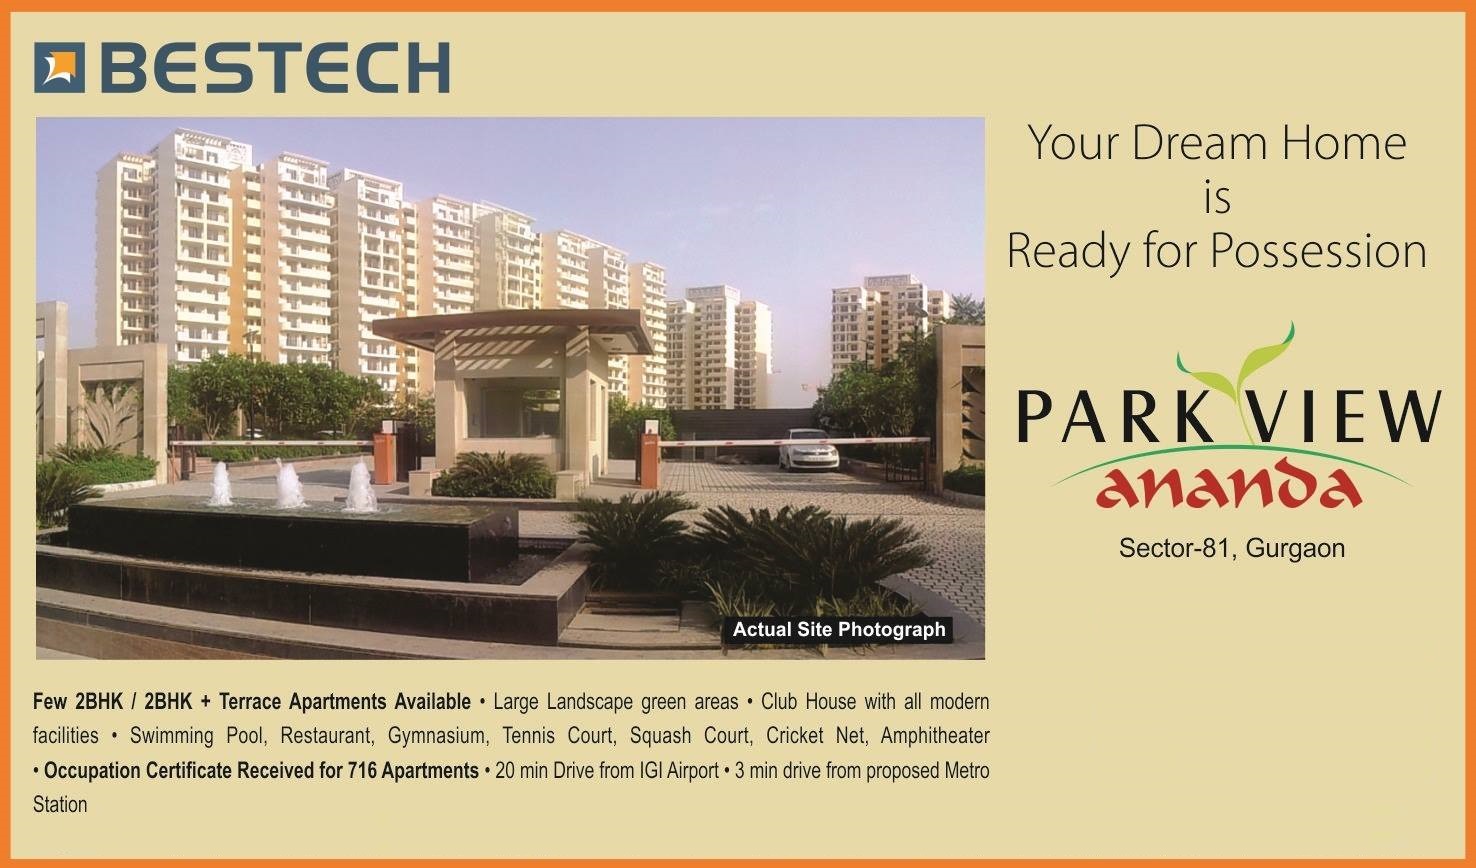 Bestech Park View Ananda is Now Ready to Move - Possession Commenced